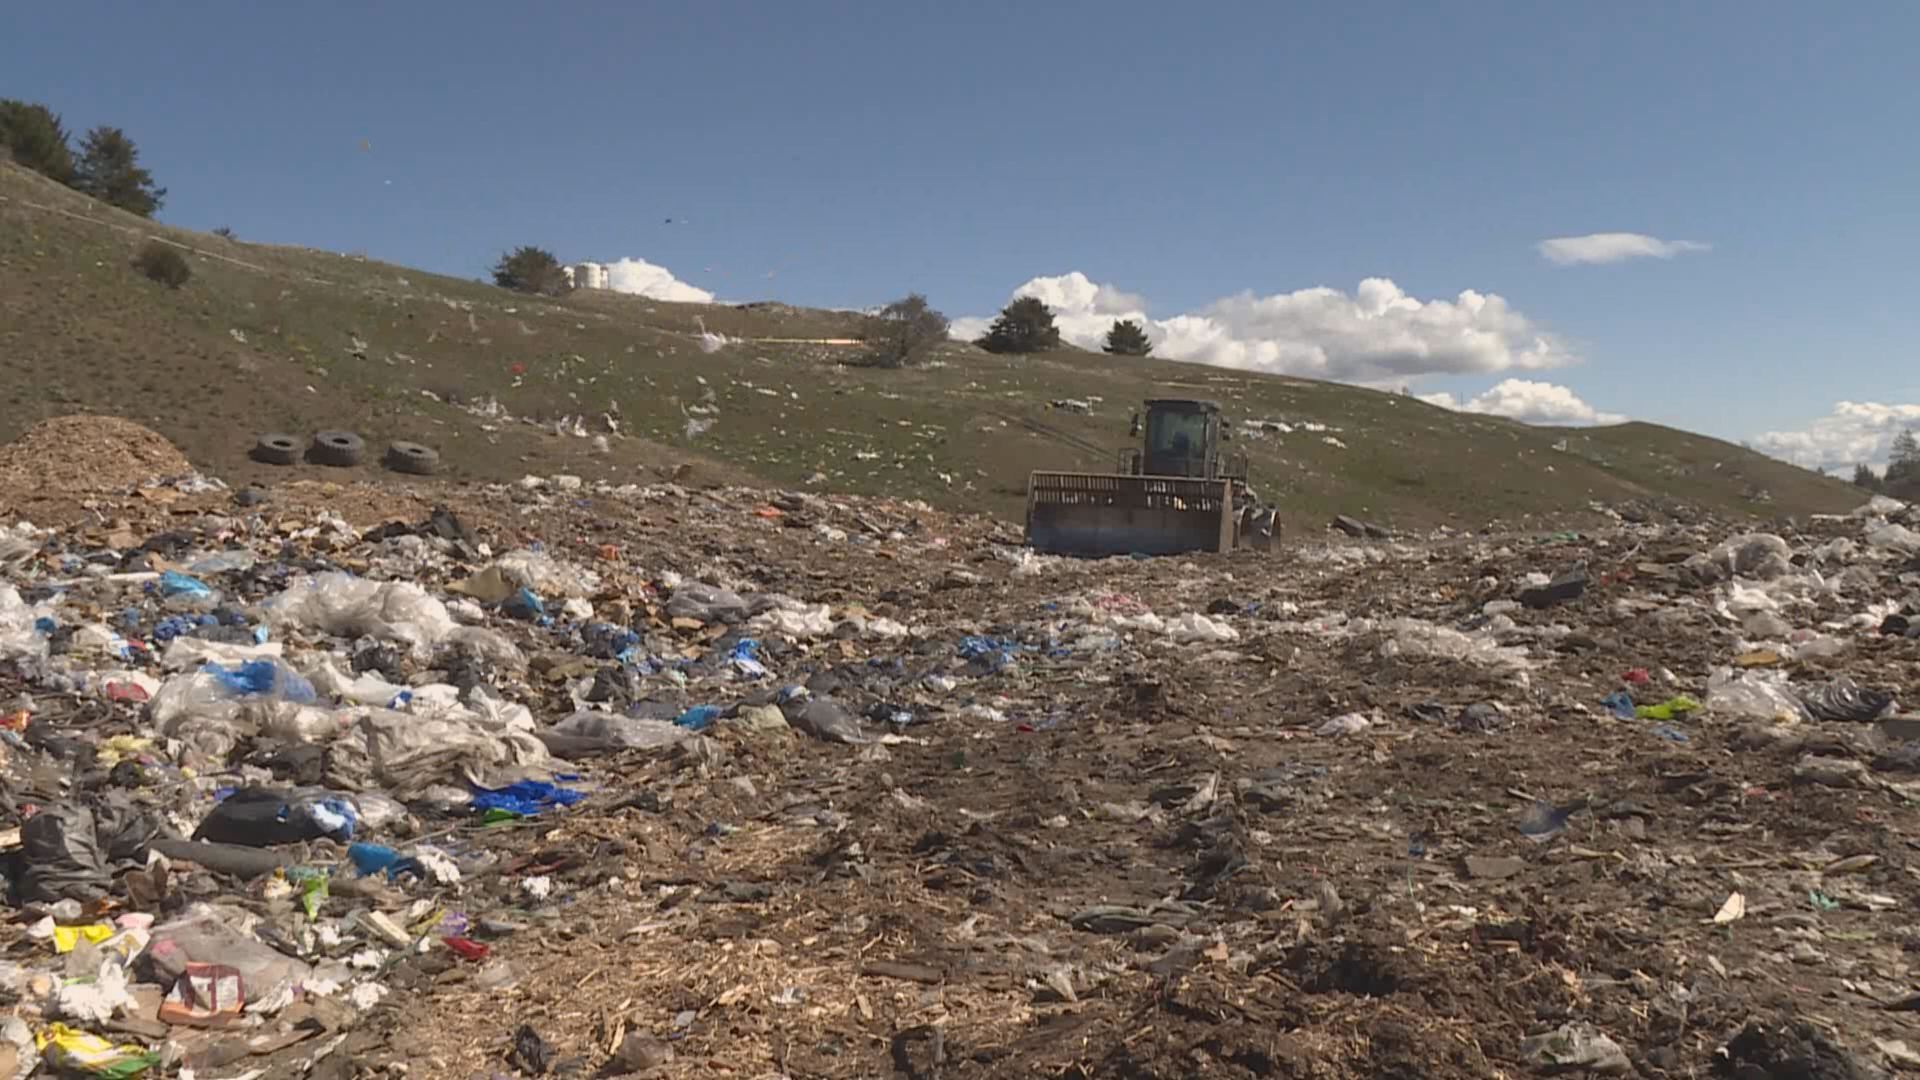 ‘Poor choices’: High levels of garbage found in Central Okanagan recycling